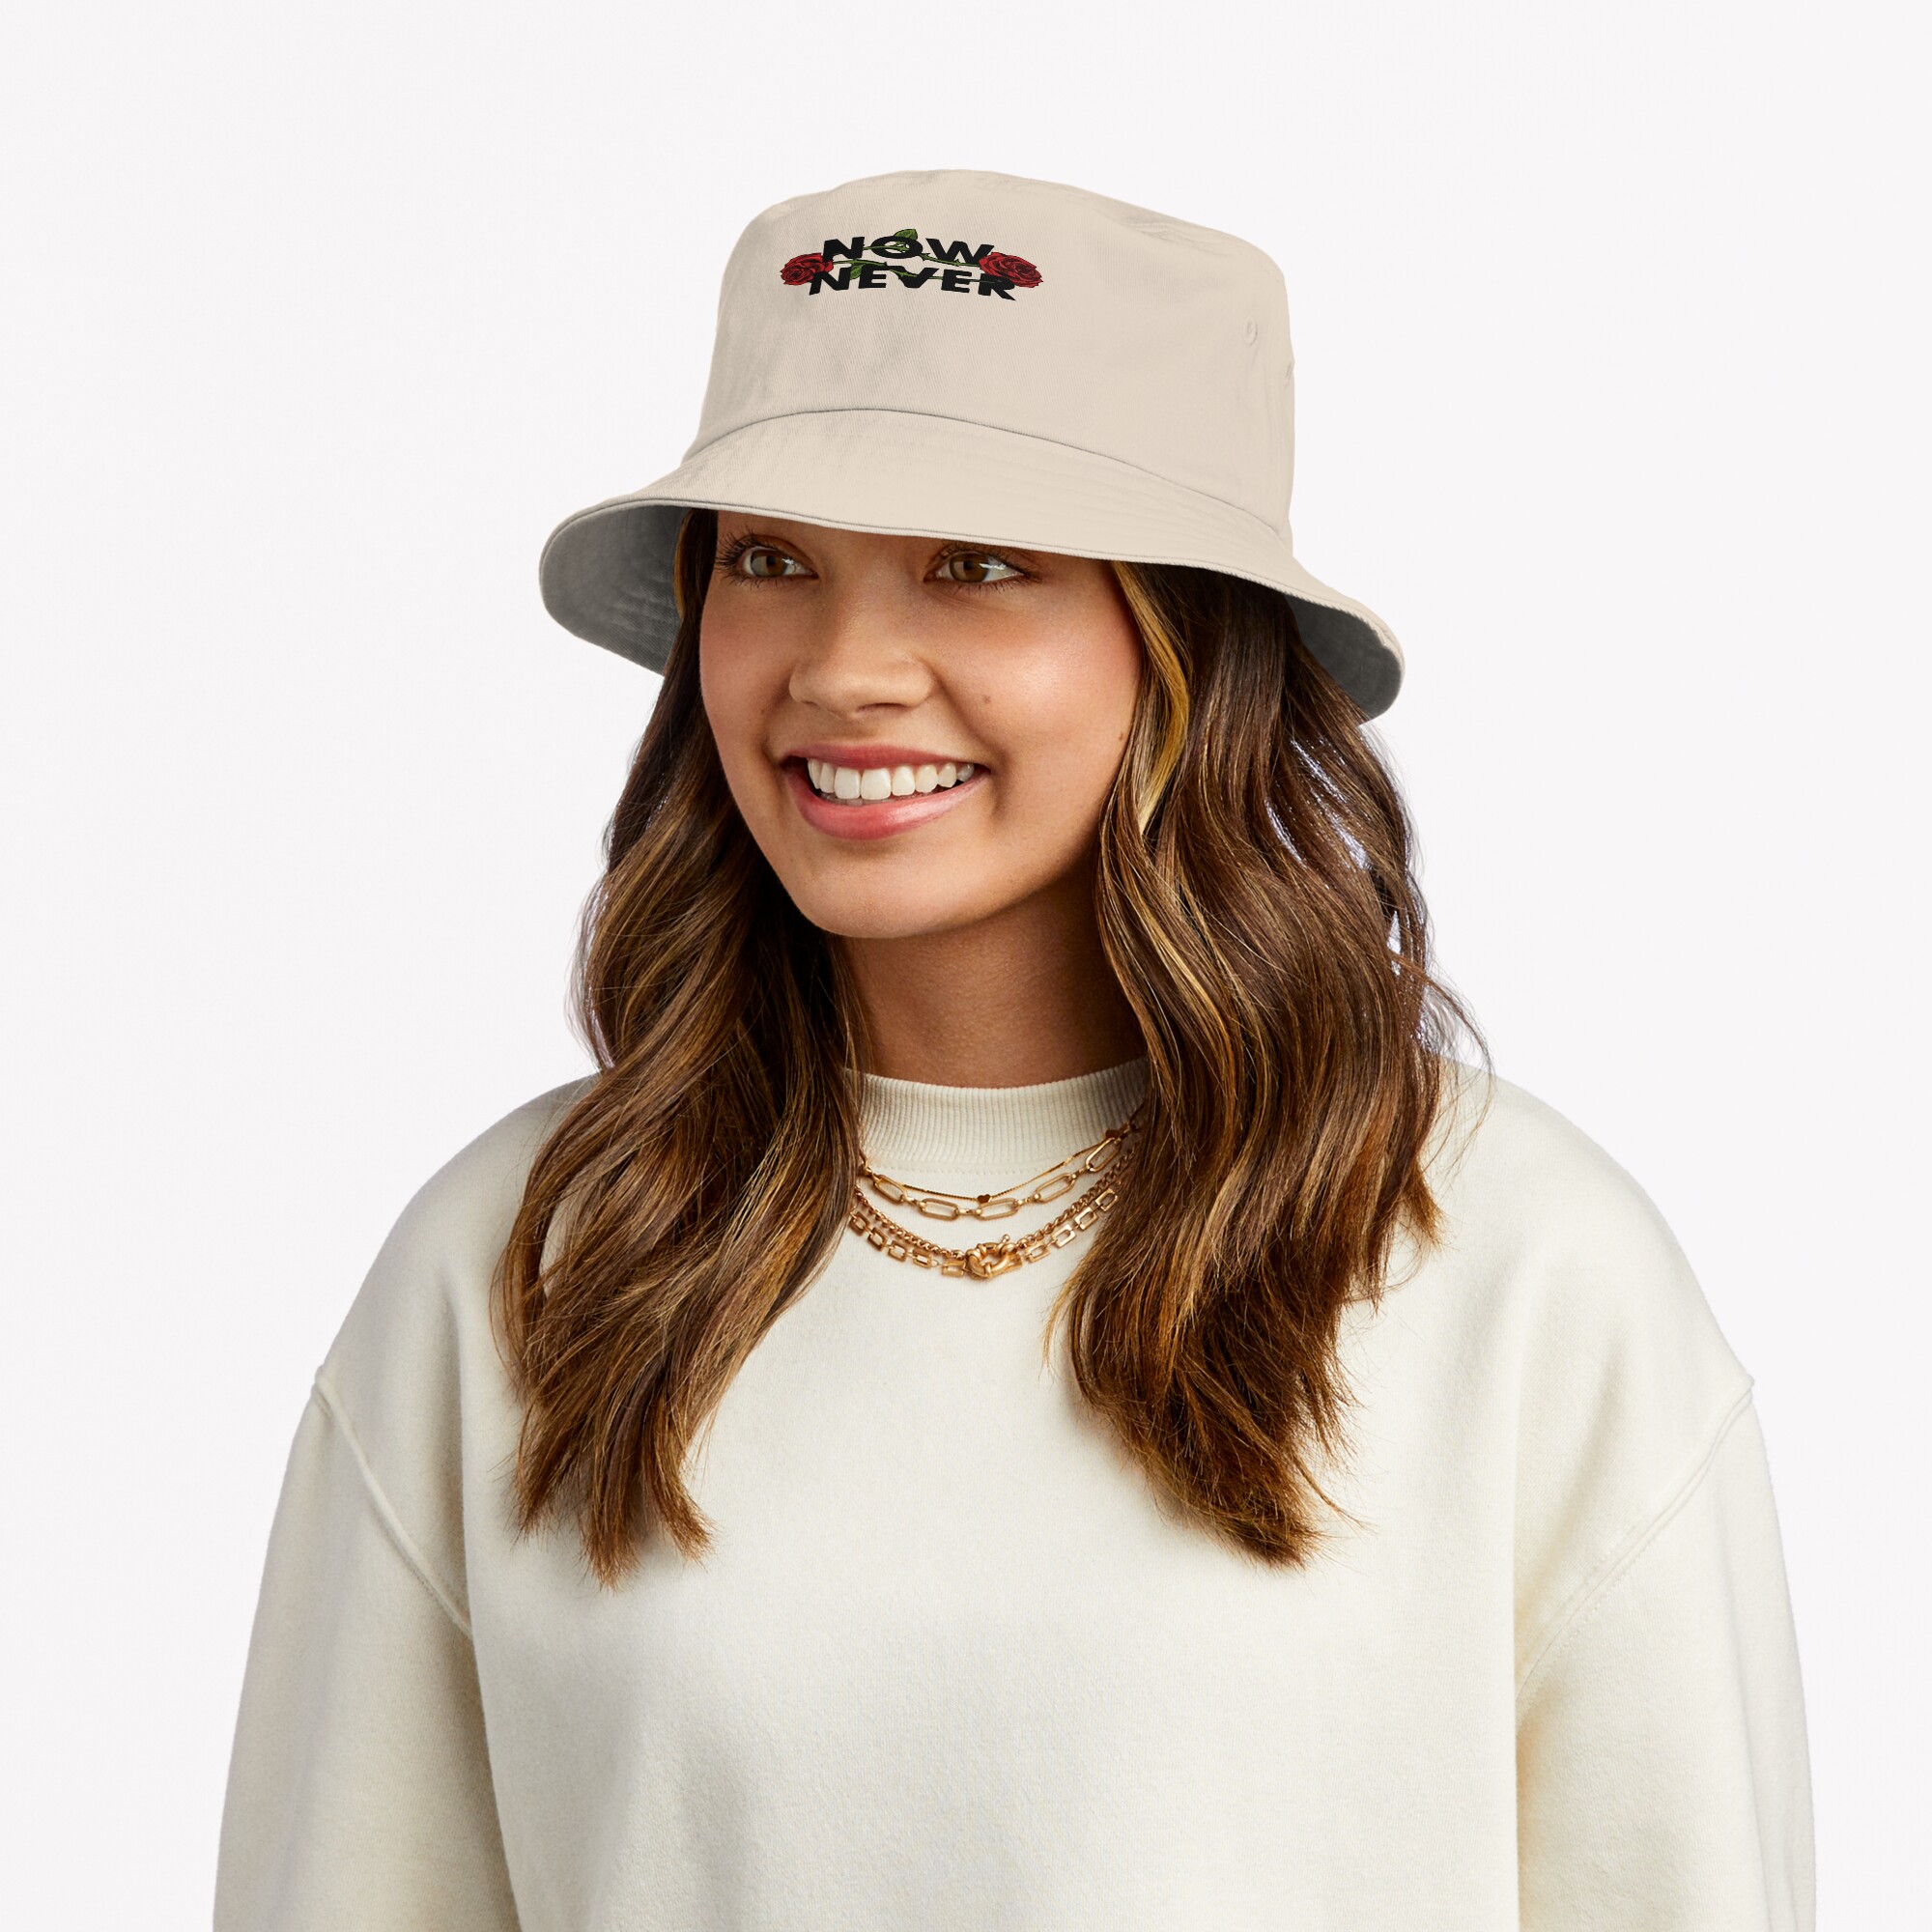 ssrcobucket hatwomense5d6c5f62bbf65eefrontsquare2000x2000 bgf8f8f8 7 - Sam And Colby Shop